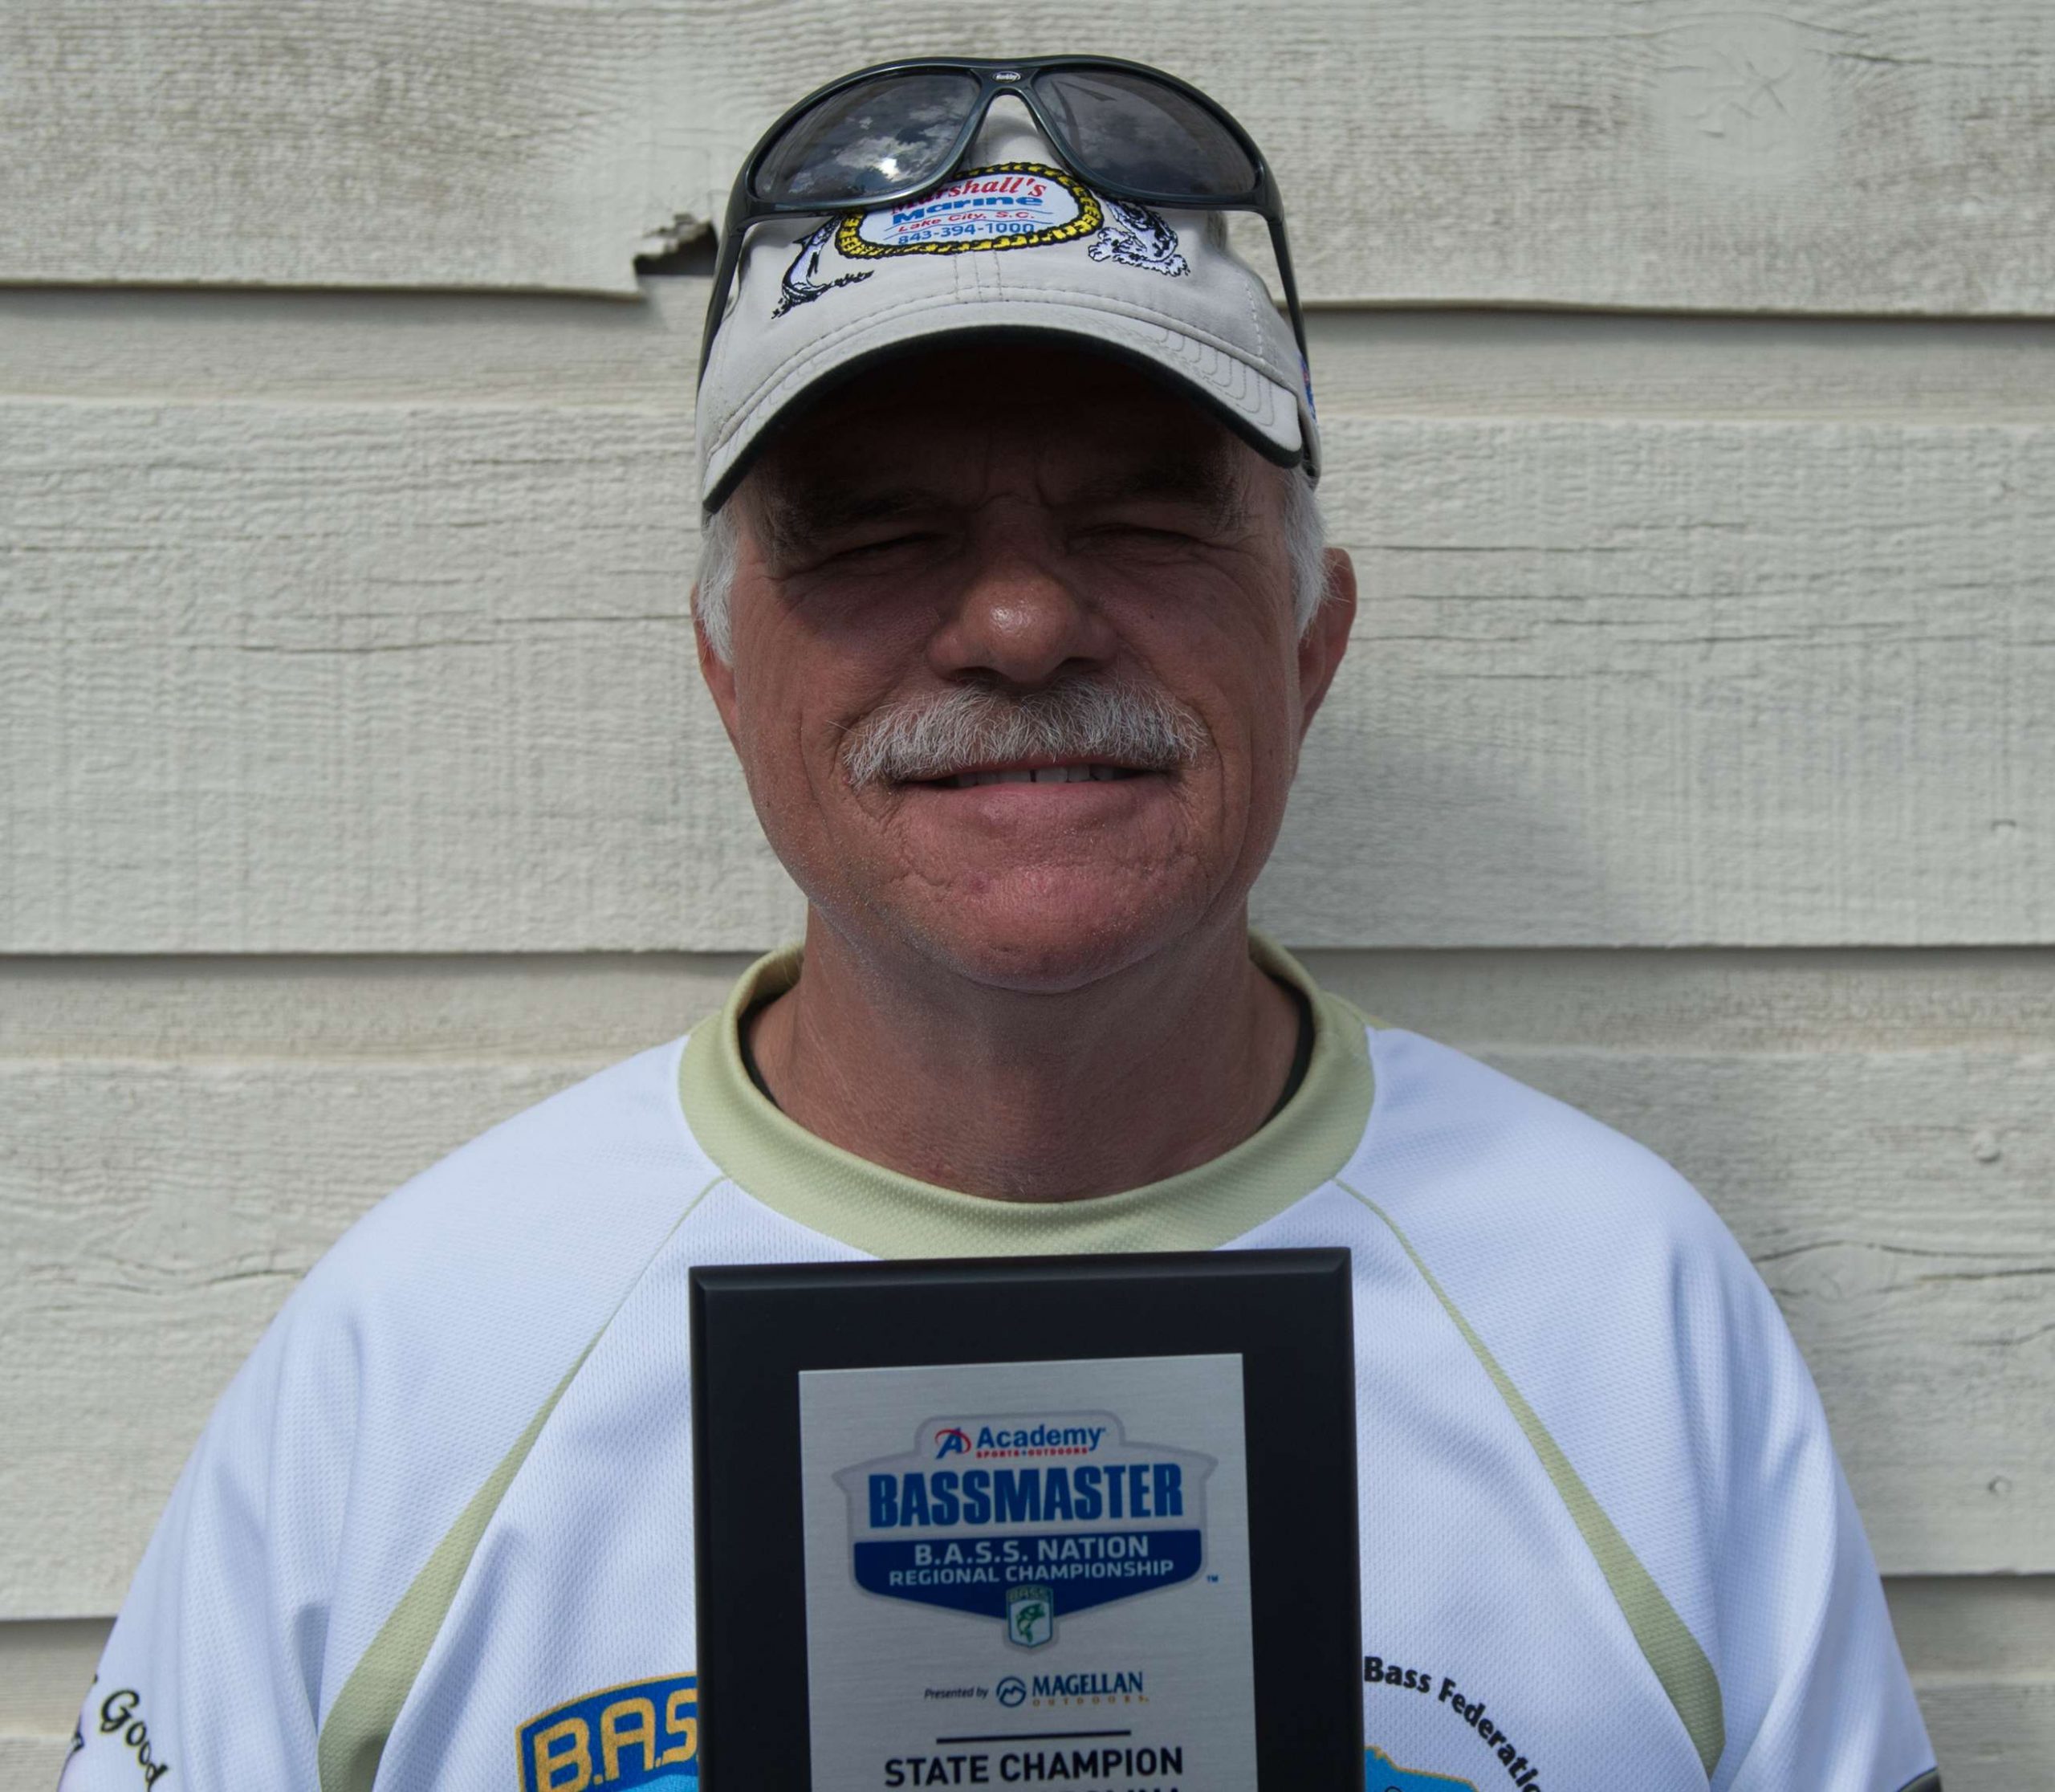 Edward Owens <br>
South Carolina Nonboater <br>
Edward Owens is retired now from being a director of software support, and that gives him plenty of time to do what he loves â golf and fish. This is his first championship, and heâs going on behalf of his club, Conway Bassmasters, which is also one of his sponsors. Owens is also sponsored by Marshallâs Marine and the South Carolina B.A.S.S. Nation.